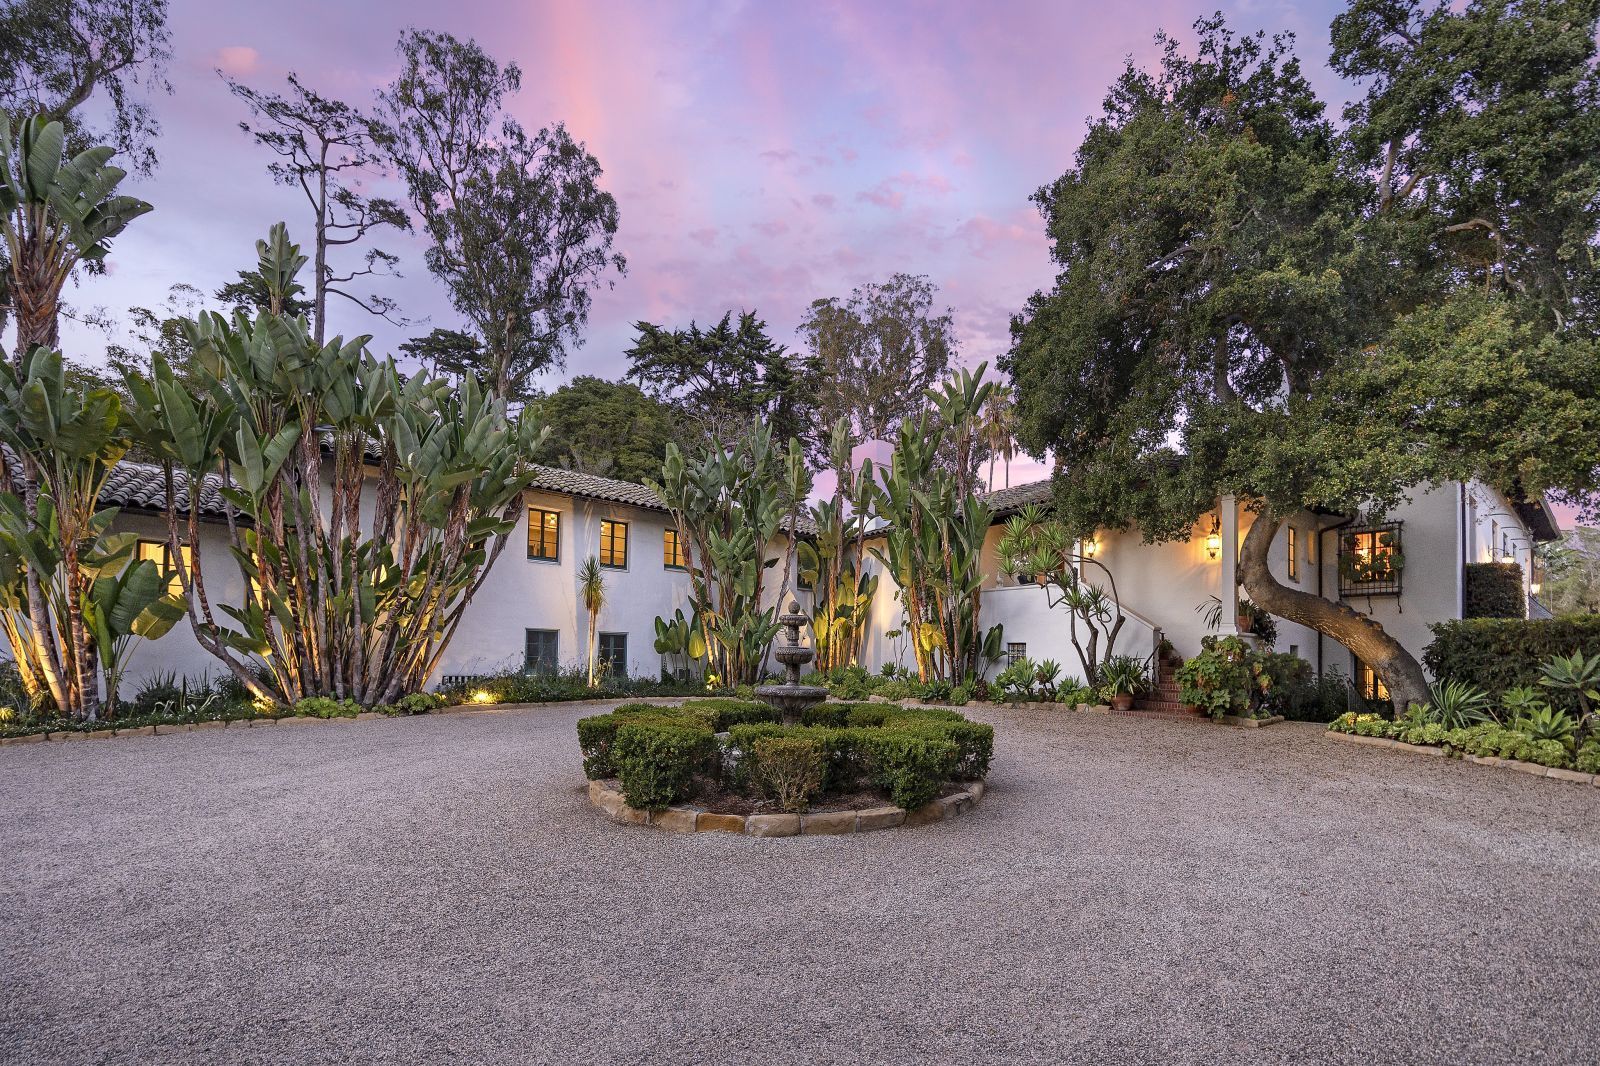 The front courtyard and facade of a large Spanish Colonial Revival Montecito home originally designed by legendary architect George Washington Smith